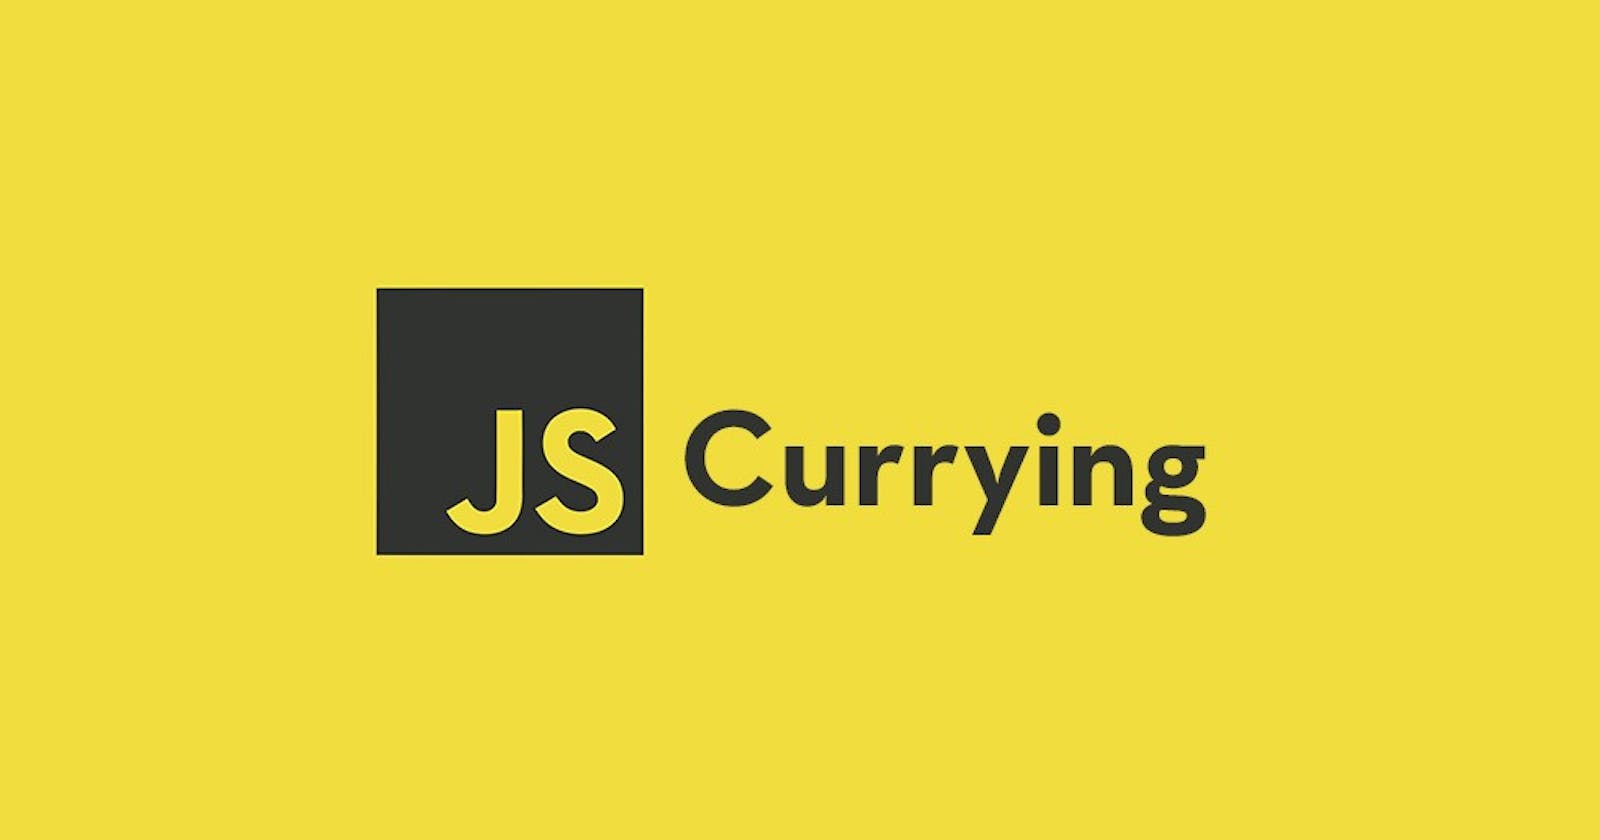 Currying in JS